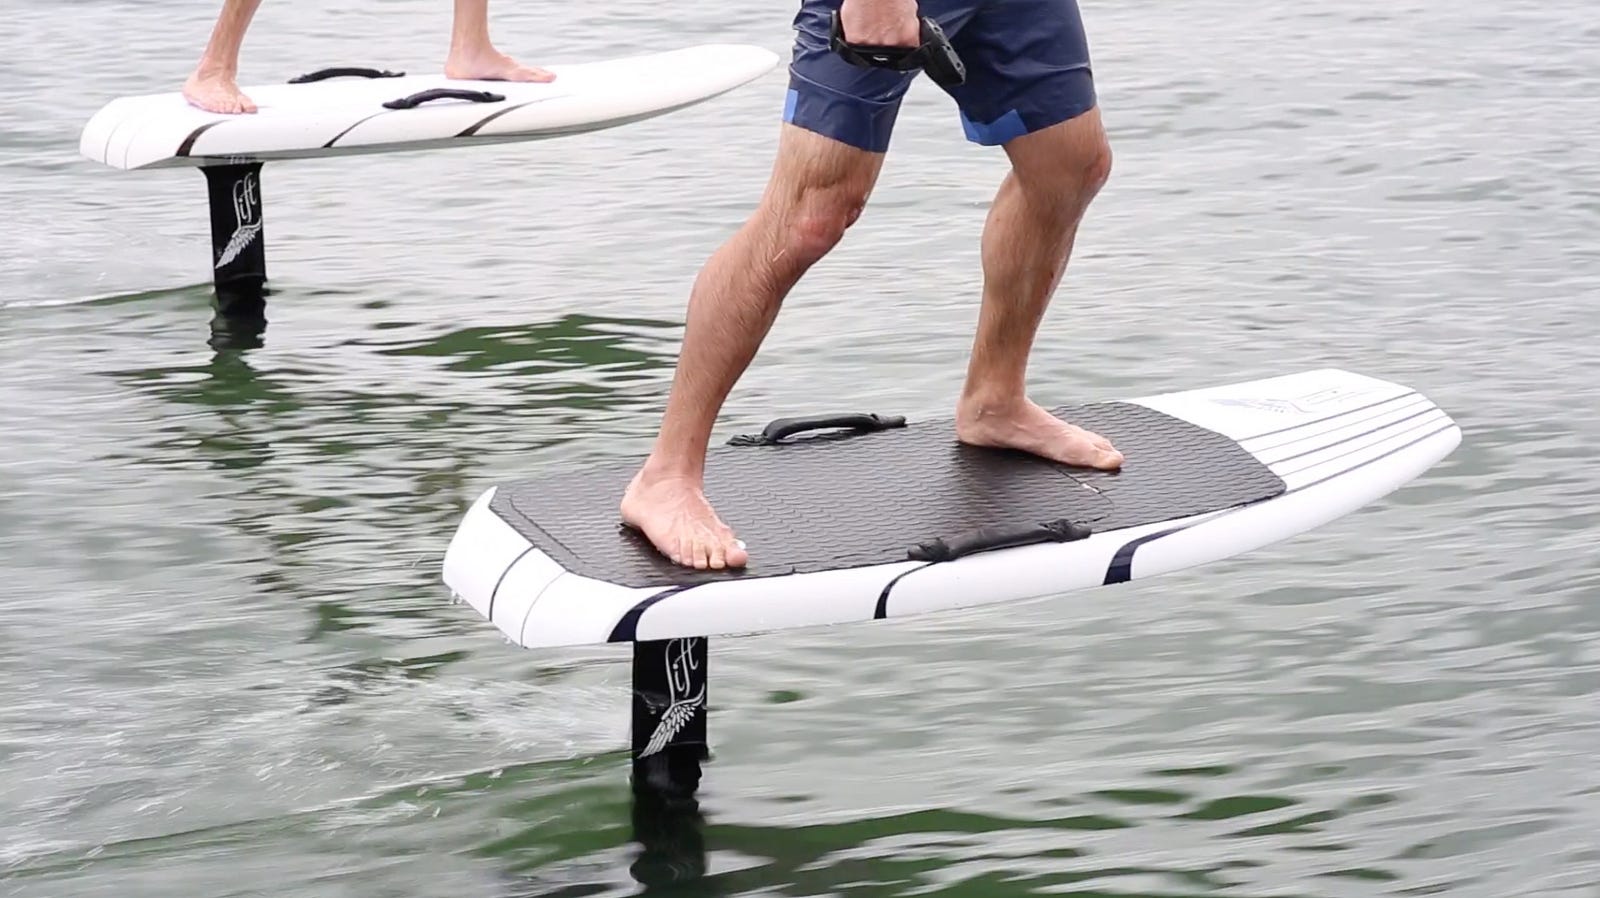 Lift EFoil Review Electric Hydrofoil Surfboard - Tech We Want.